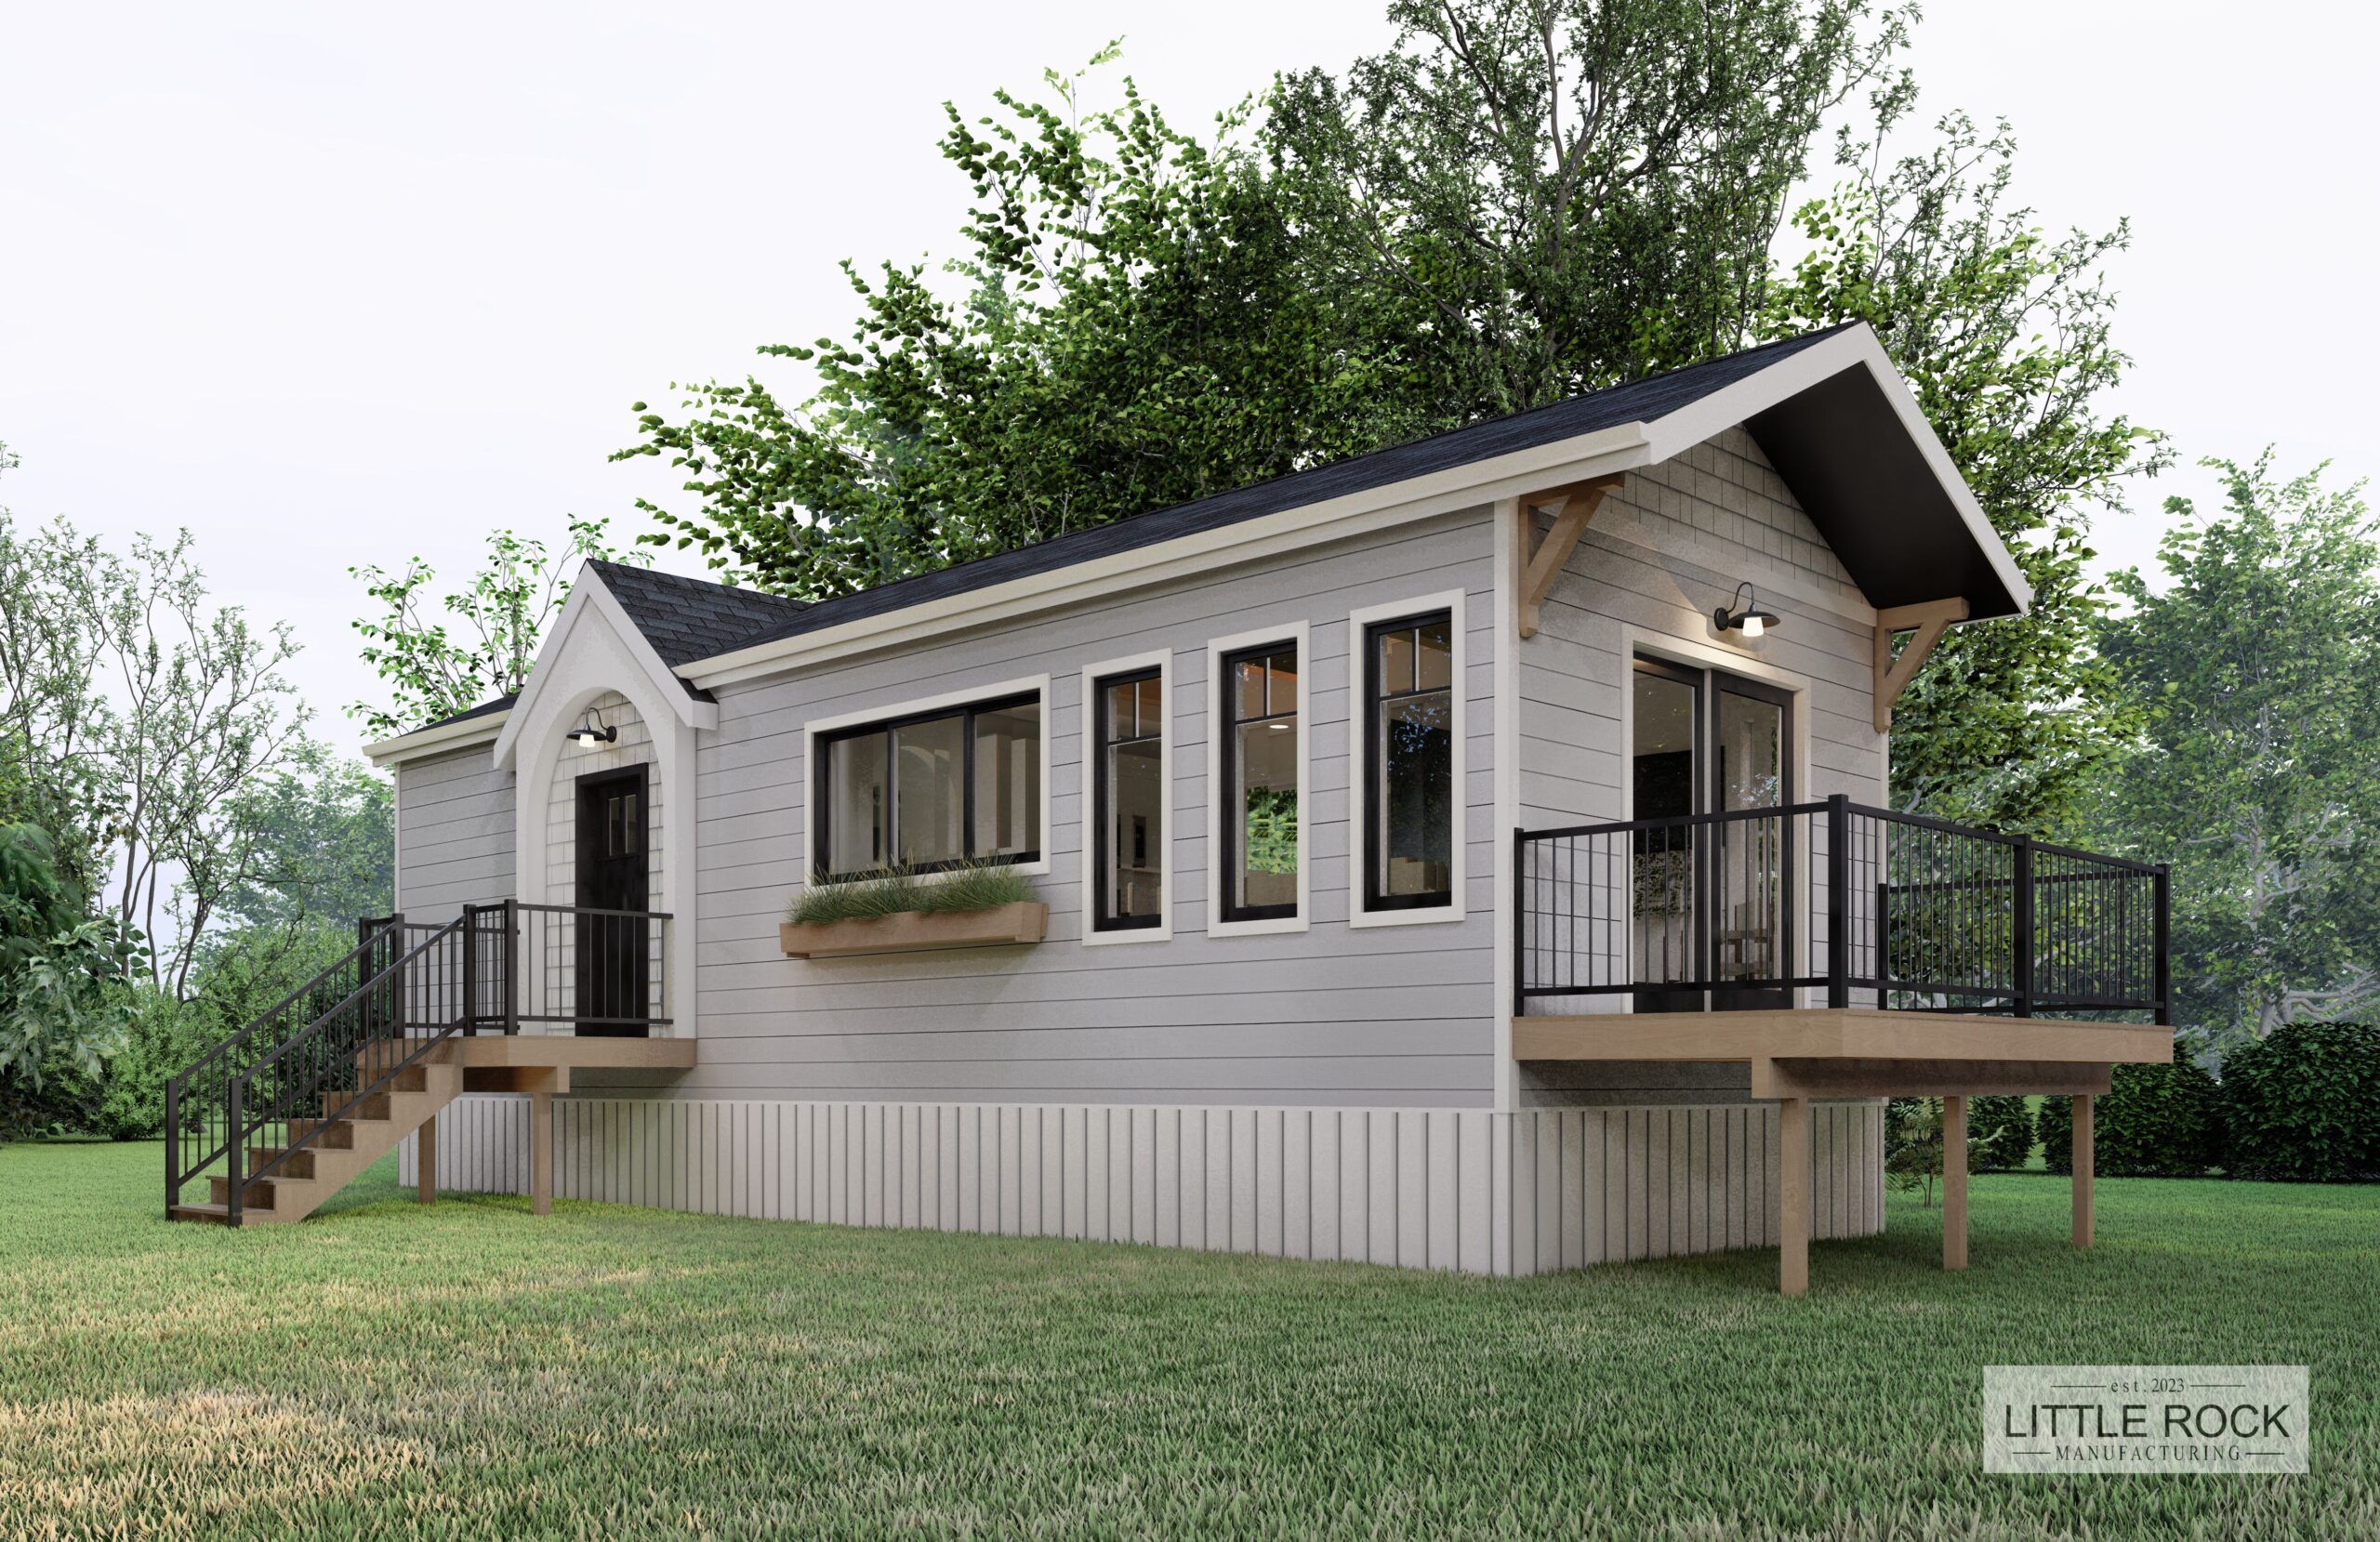 The Brighton is a 1 bedroom, 1 bathroom residence built by Little Rock Manufacturing